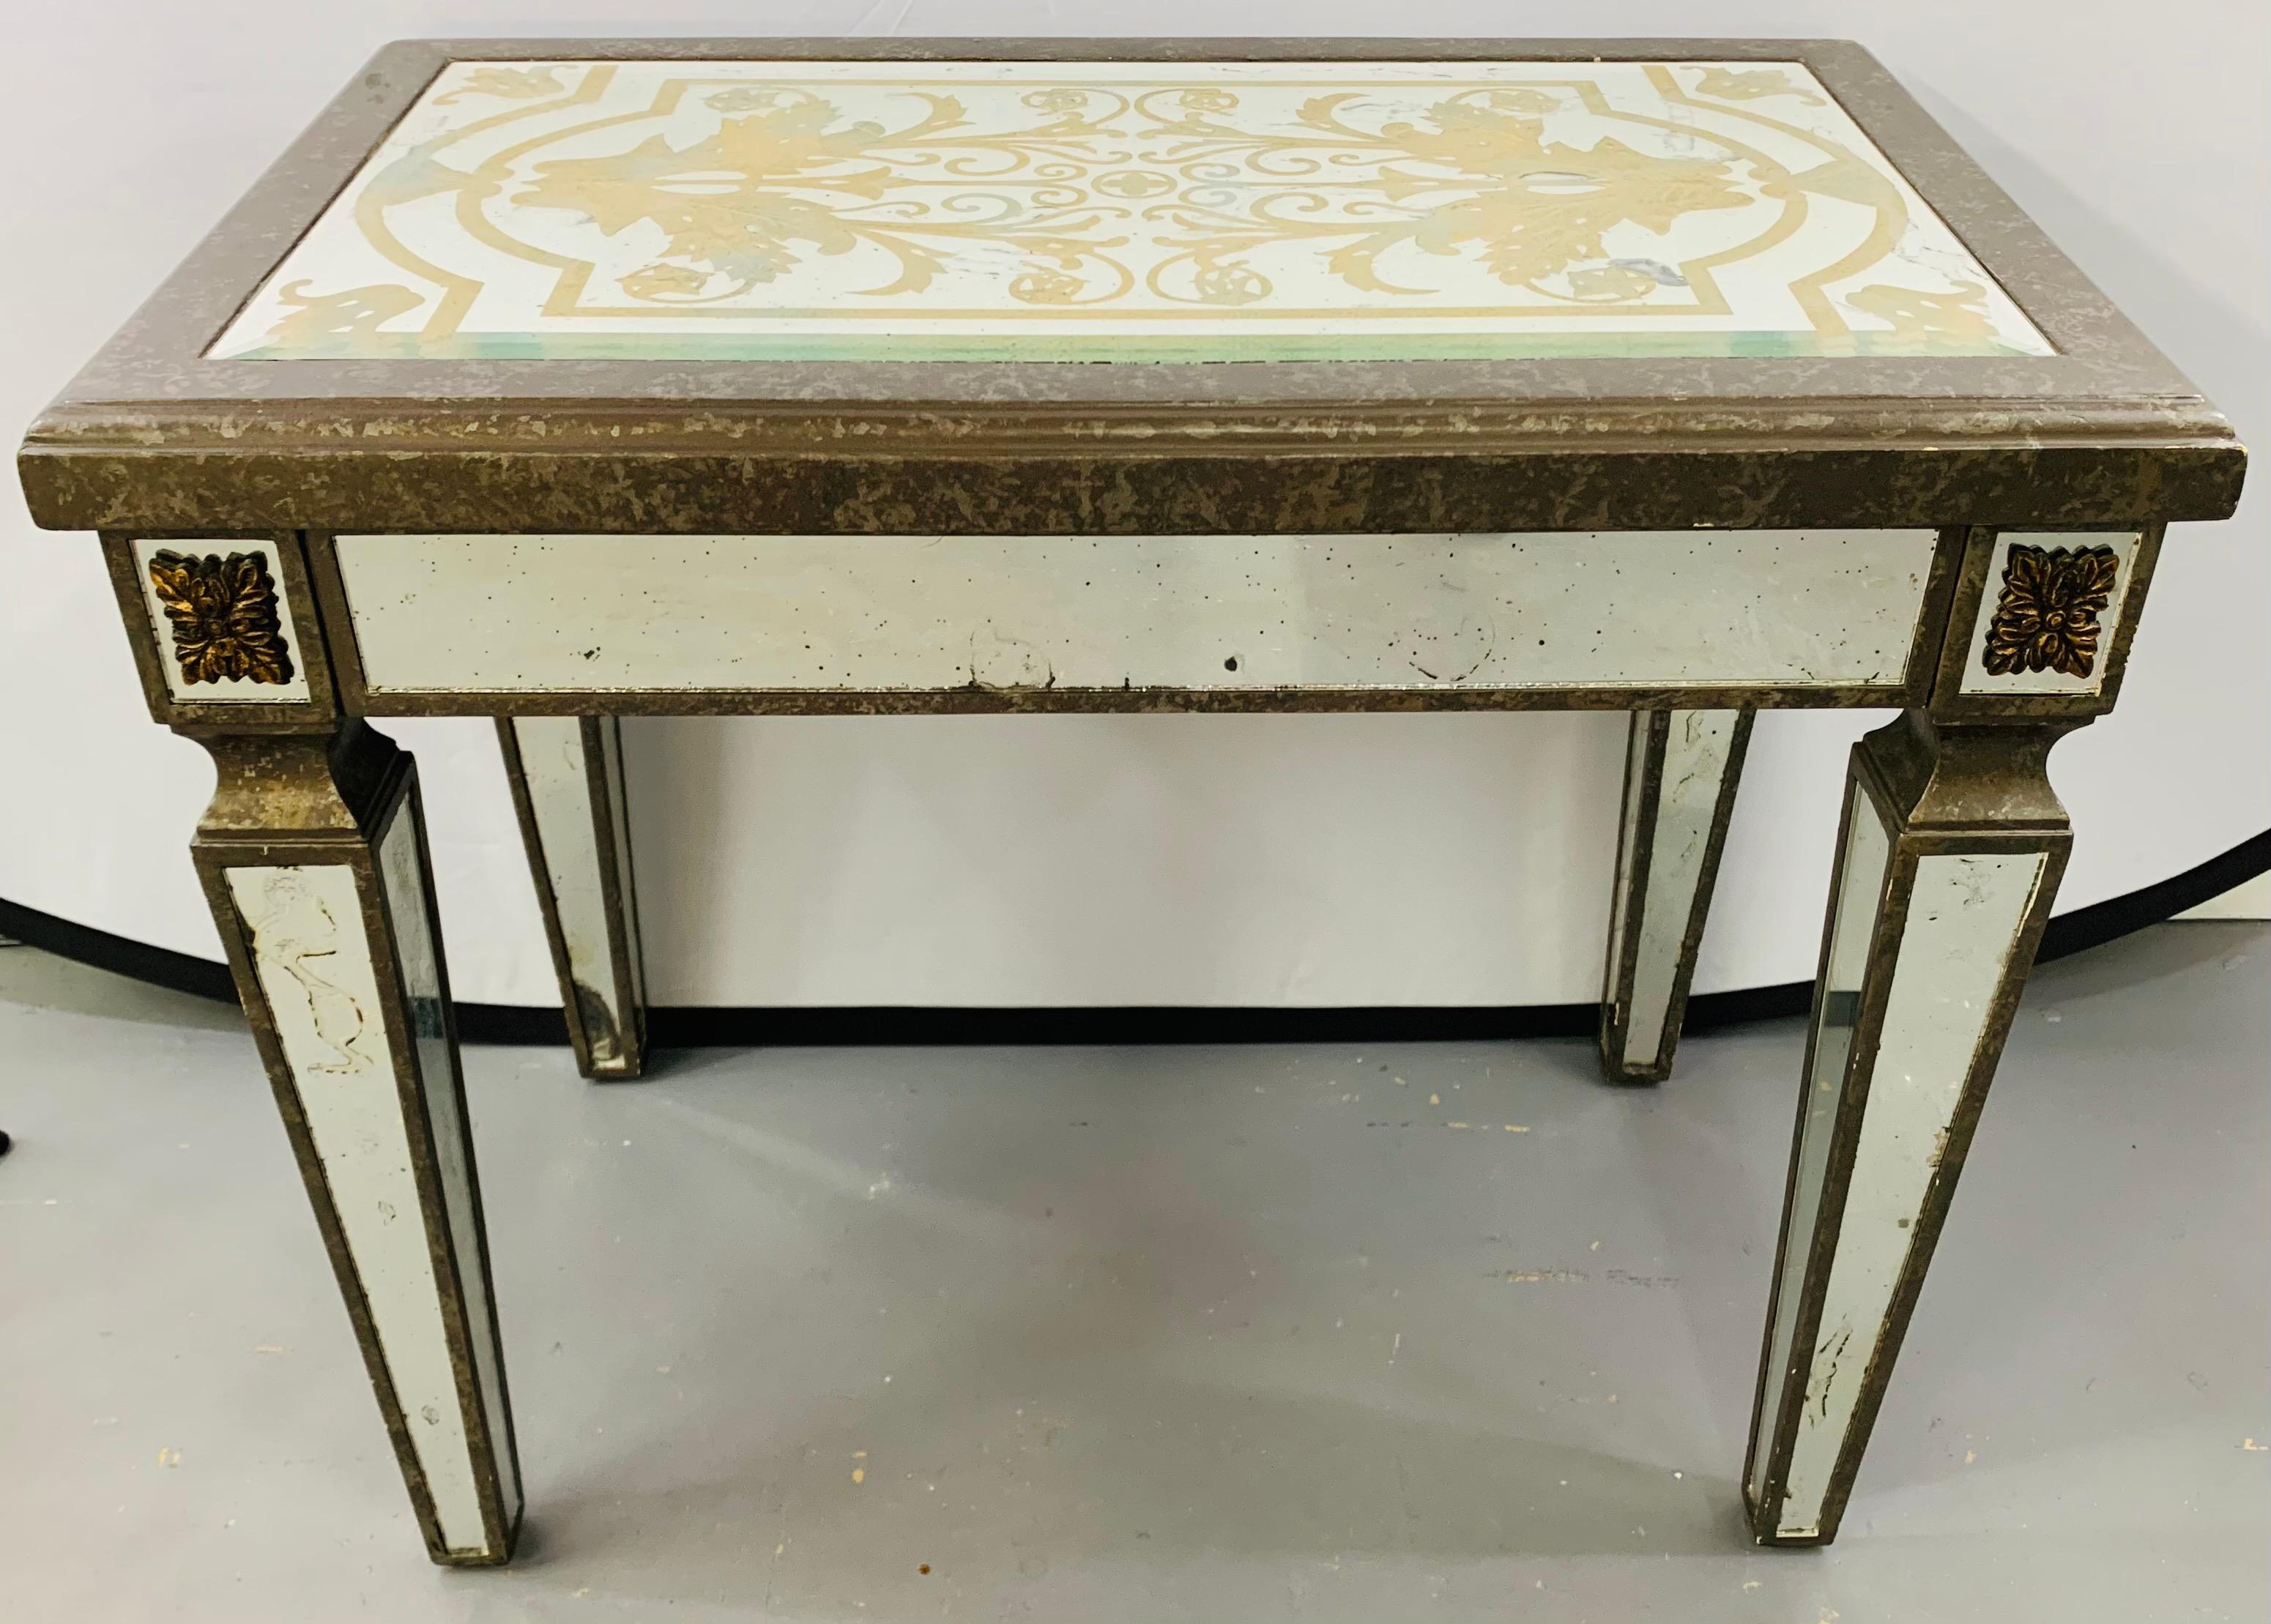 A Hollywood Regency style églomisé mirrored side table. The table top features a fine gold yellow paint design with a wooden antiqued frame. The fluted legs are elegant and also mirrored in an antiqued fashion.

There is a small damage to the top